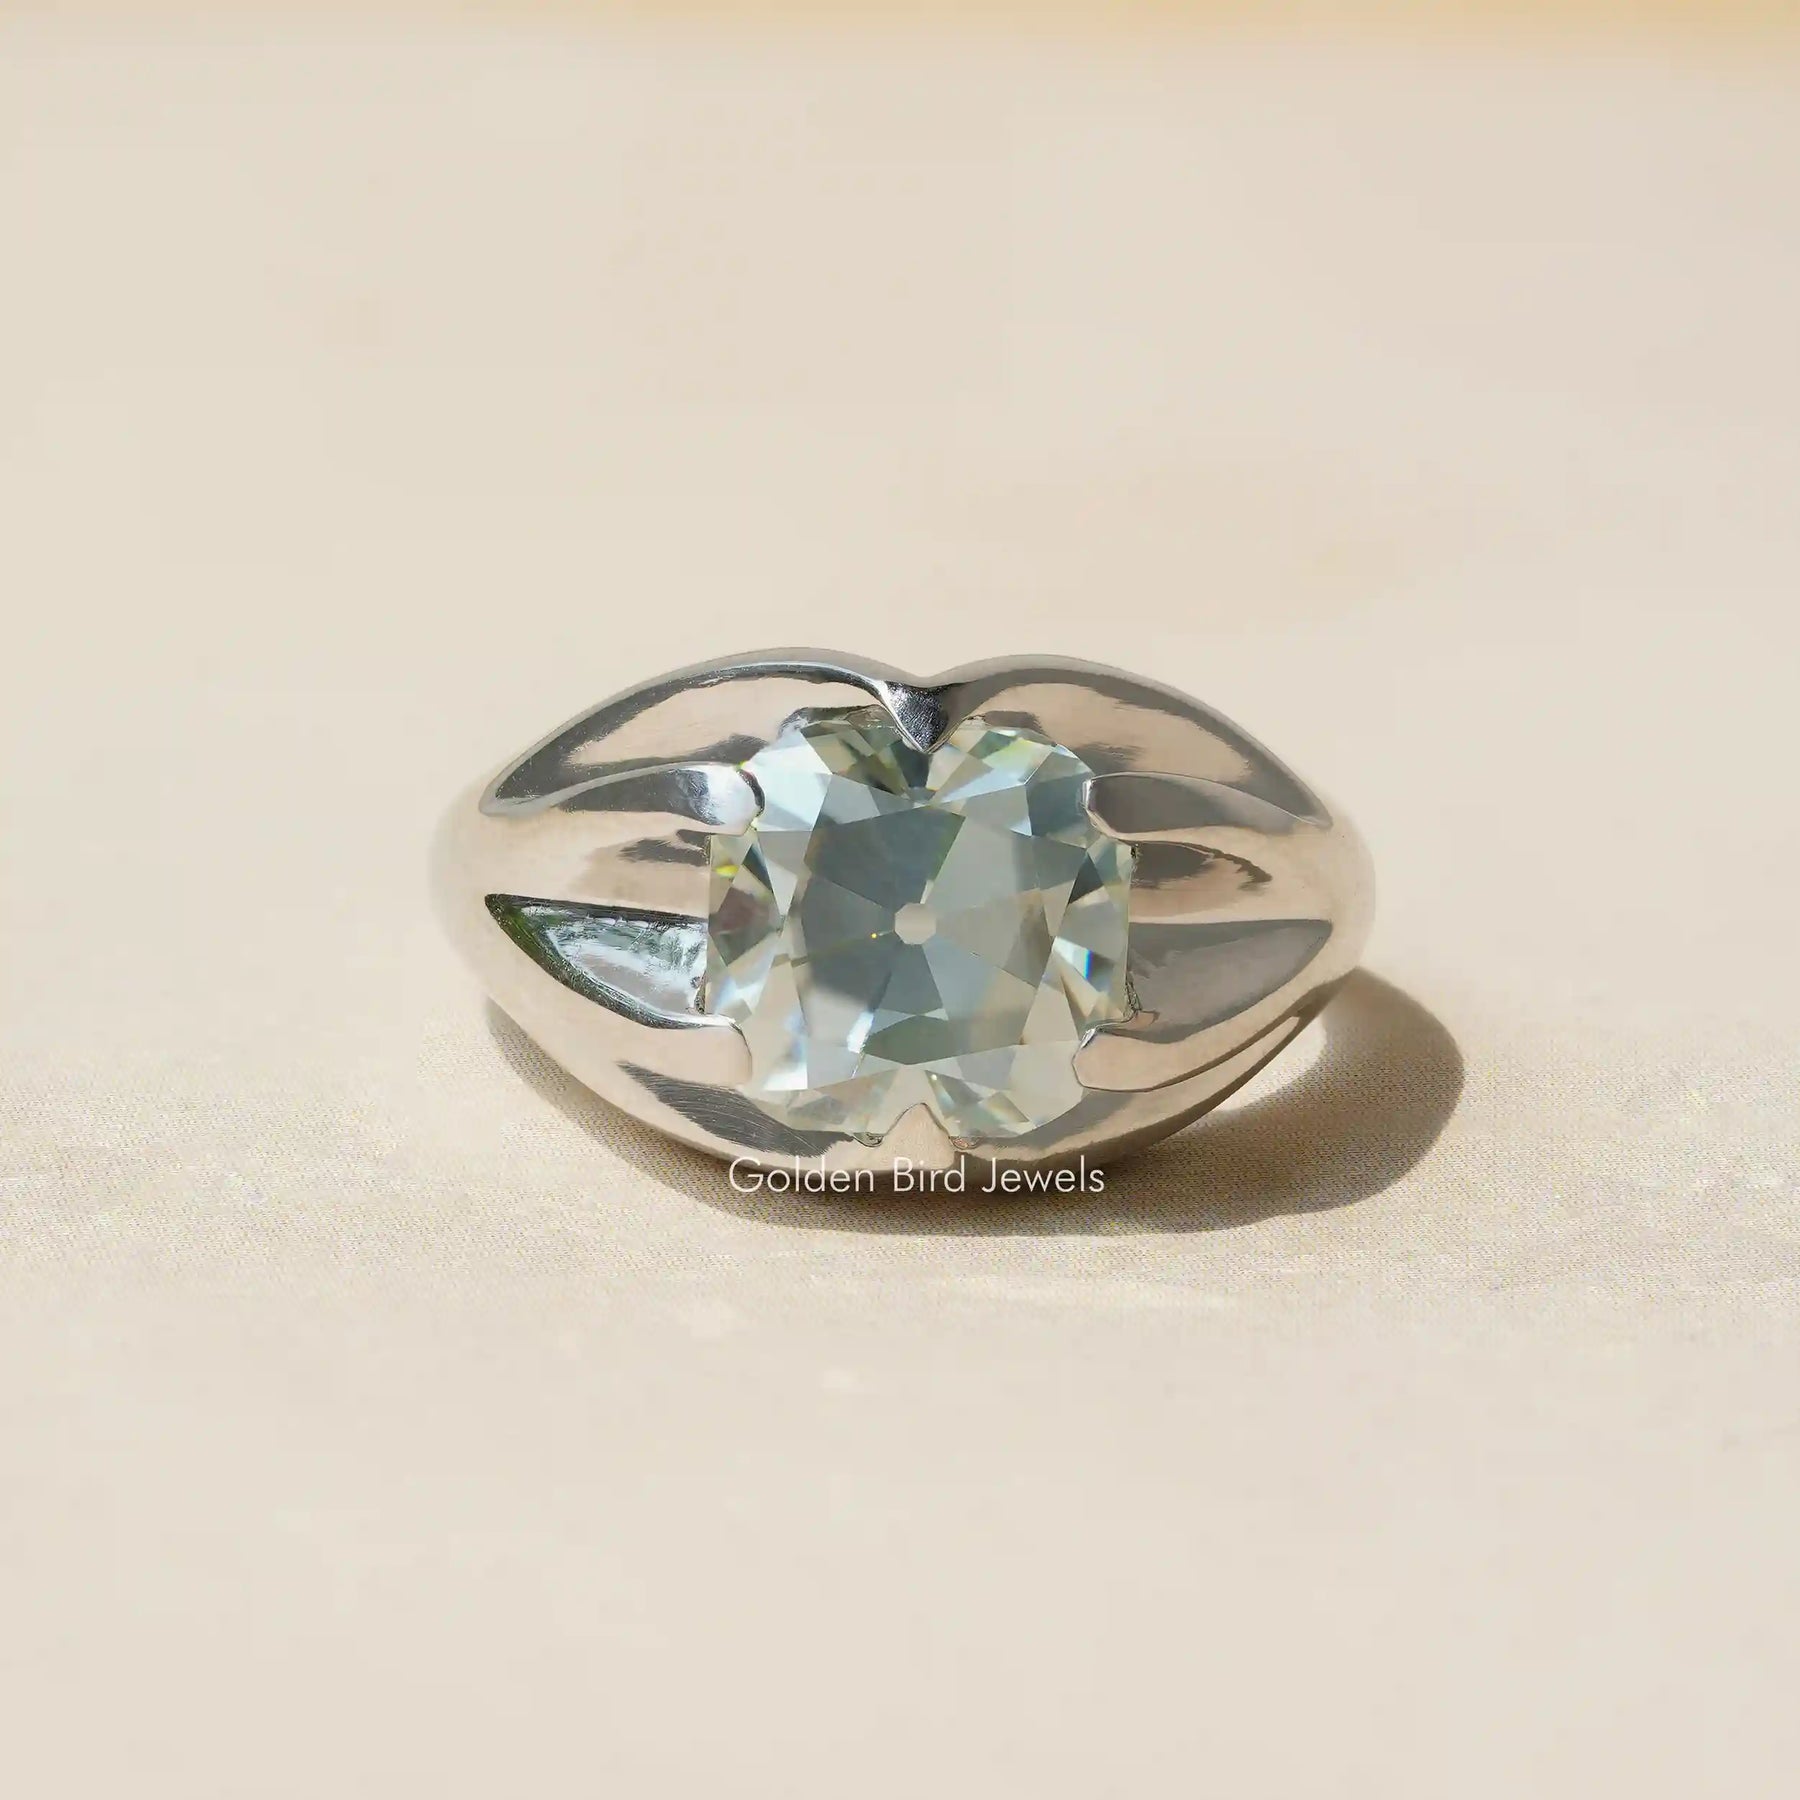 [Moissanite Light Blue Old Mine Cushion Cut Solitaire Engagement Ring]-[Golden Bird Jewels]